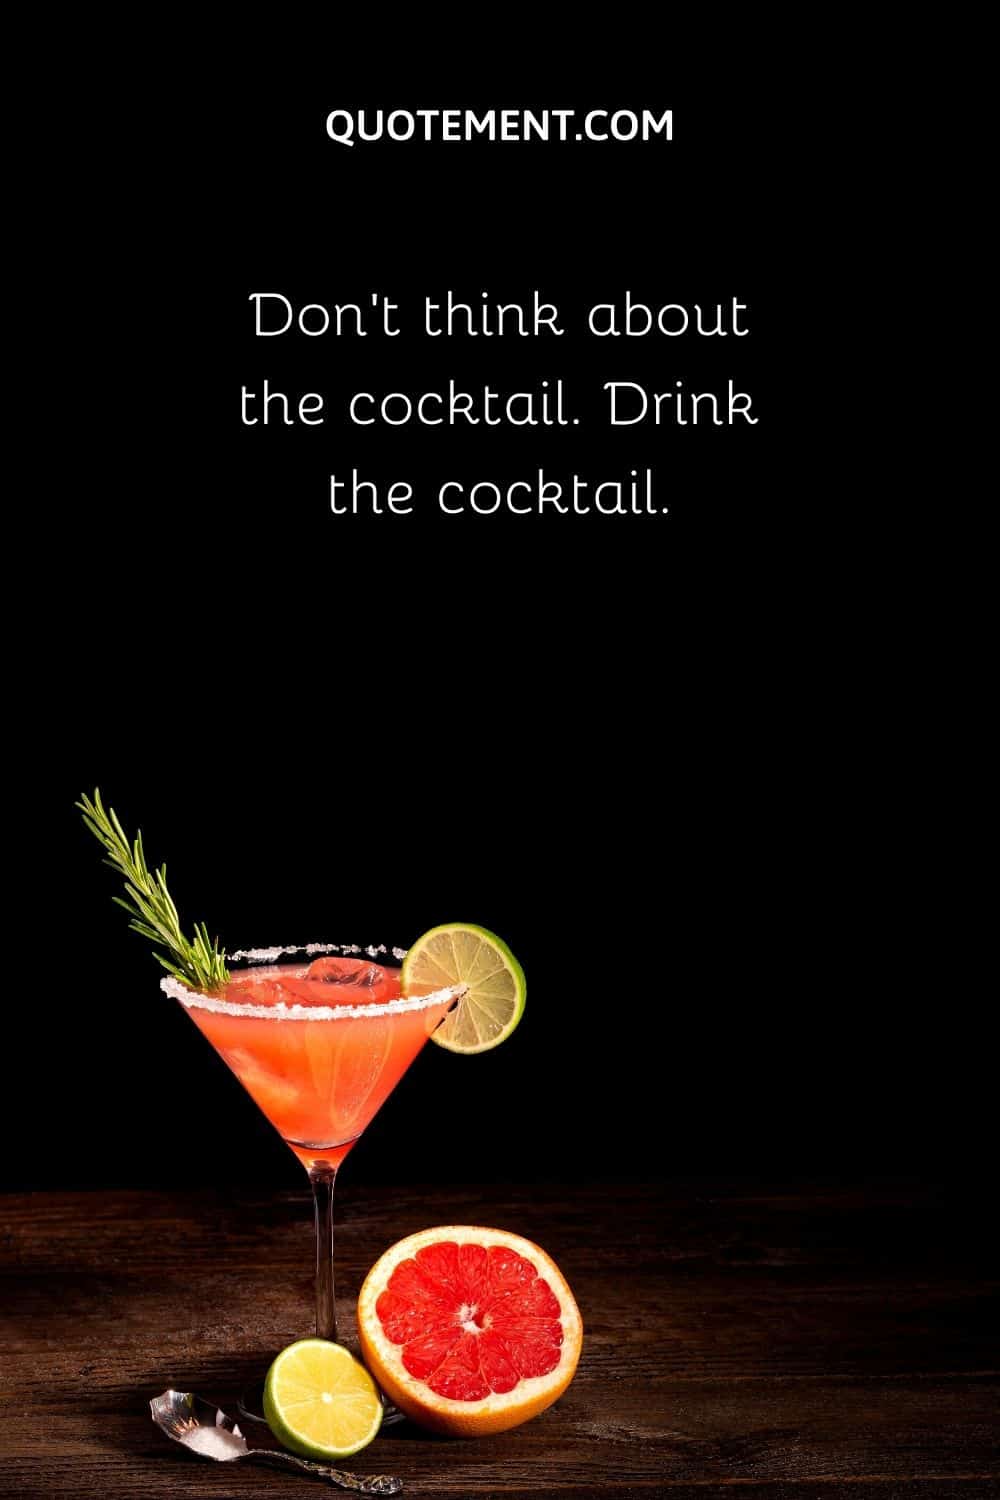 Don’t think about the cocktail. Drink the cocktail.